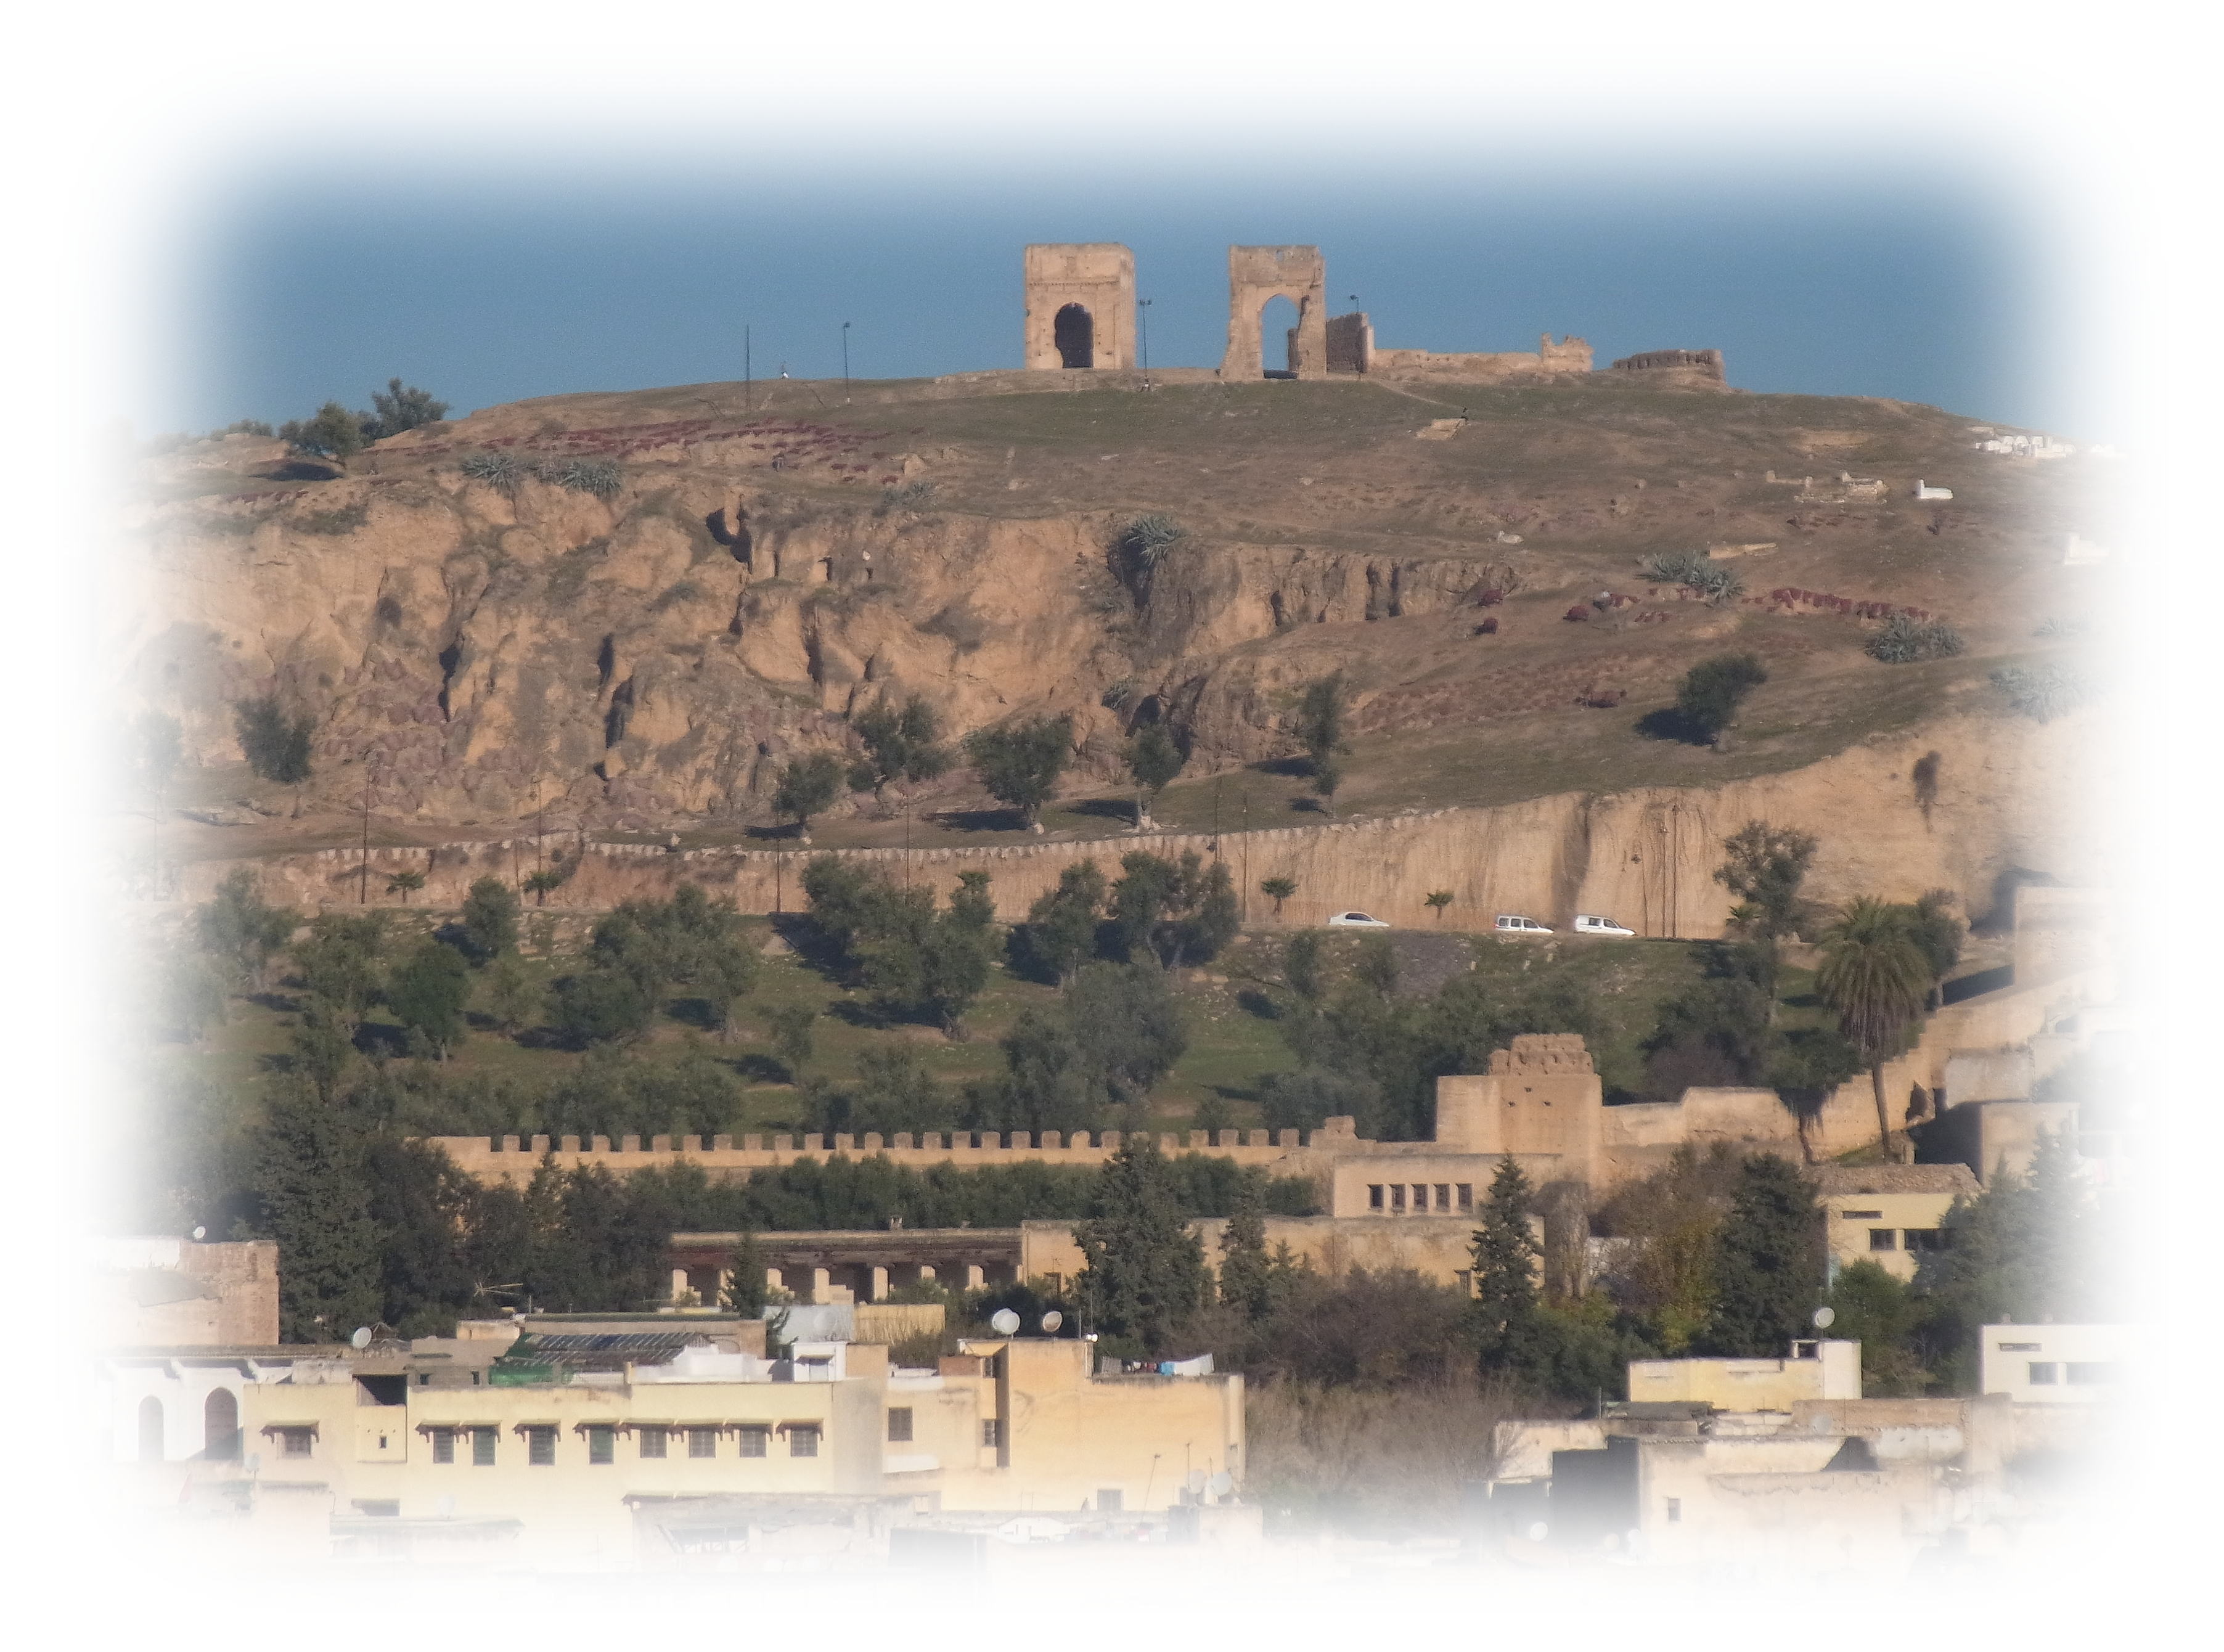 From the rooftop terrace of Dar Bensouda, you can see the ruins on the hill of Fes.